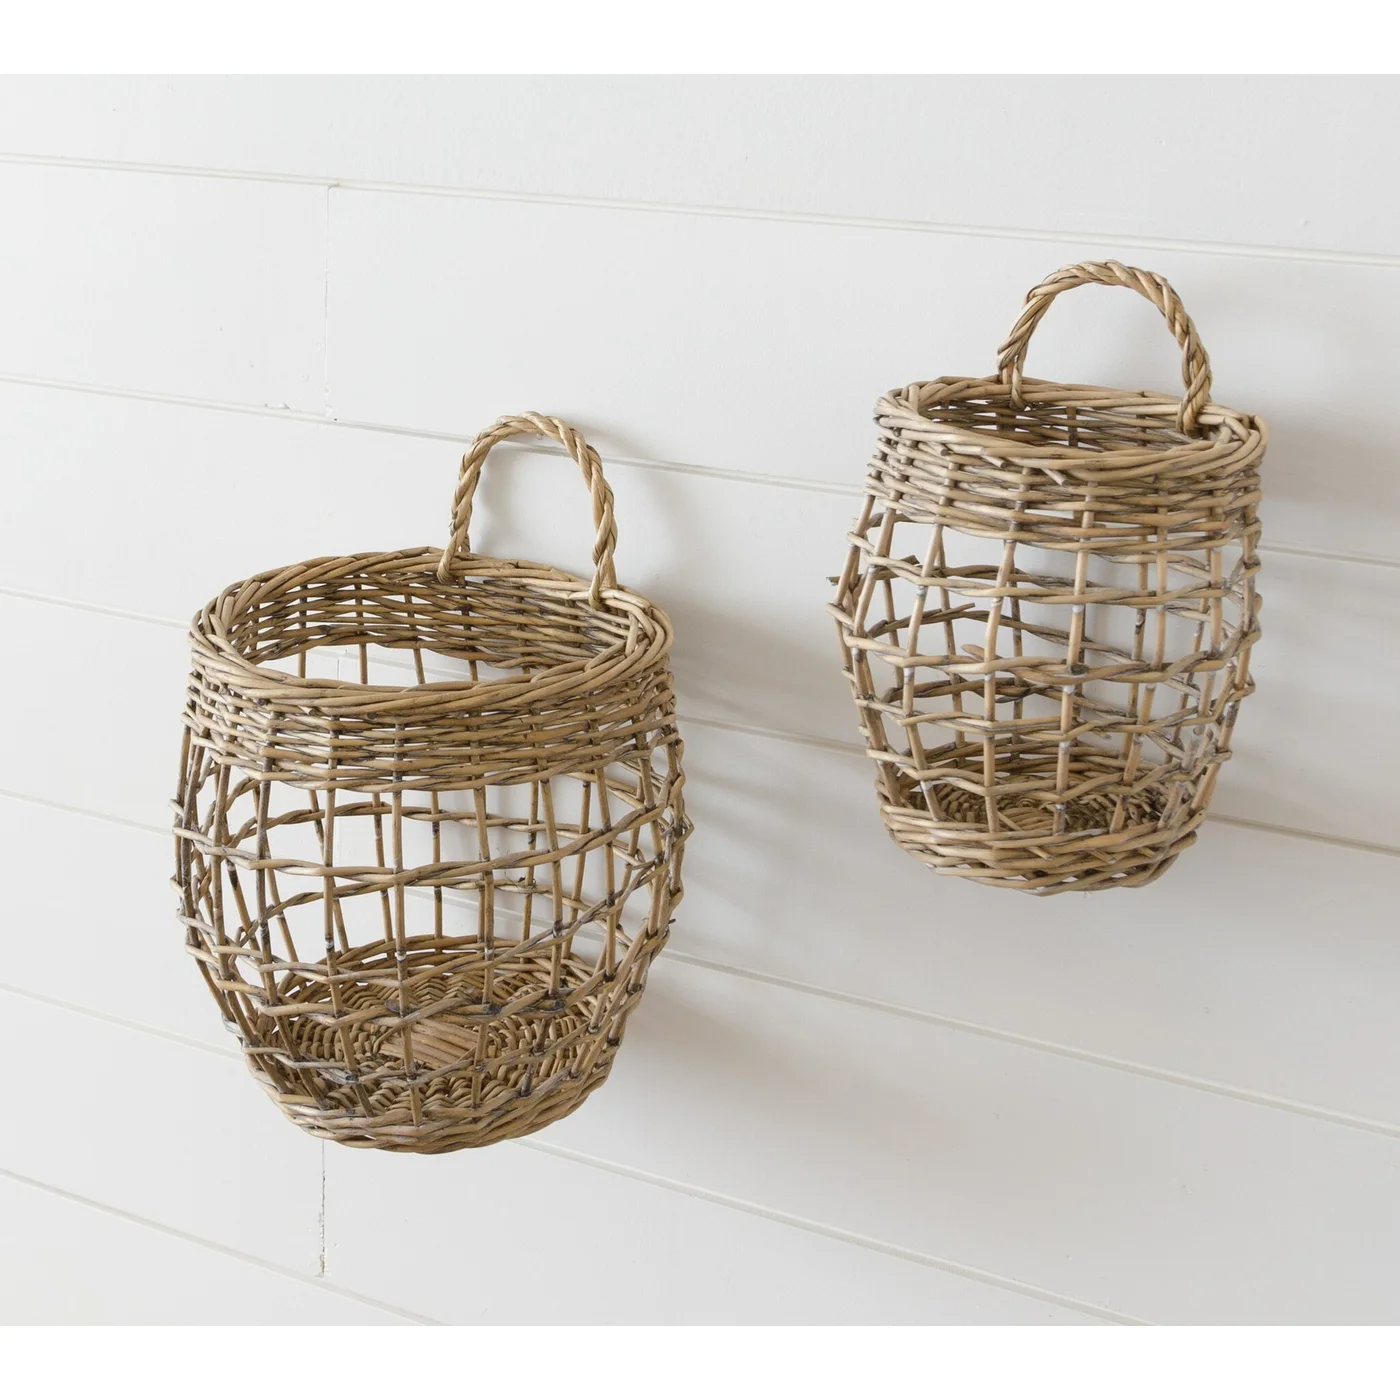 Set of 2 Hanging Open Weave Willow Baskets